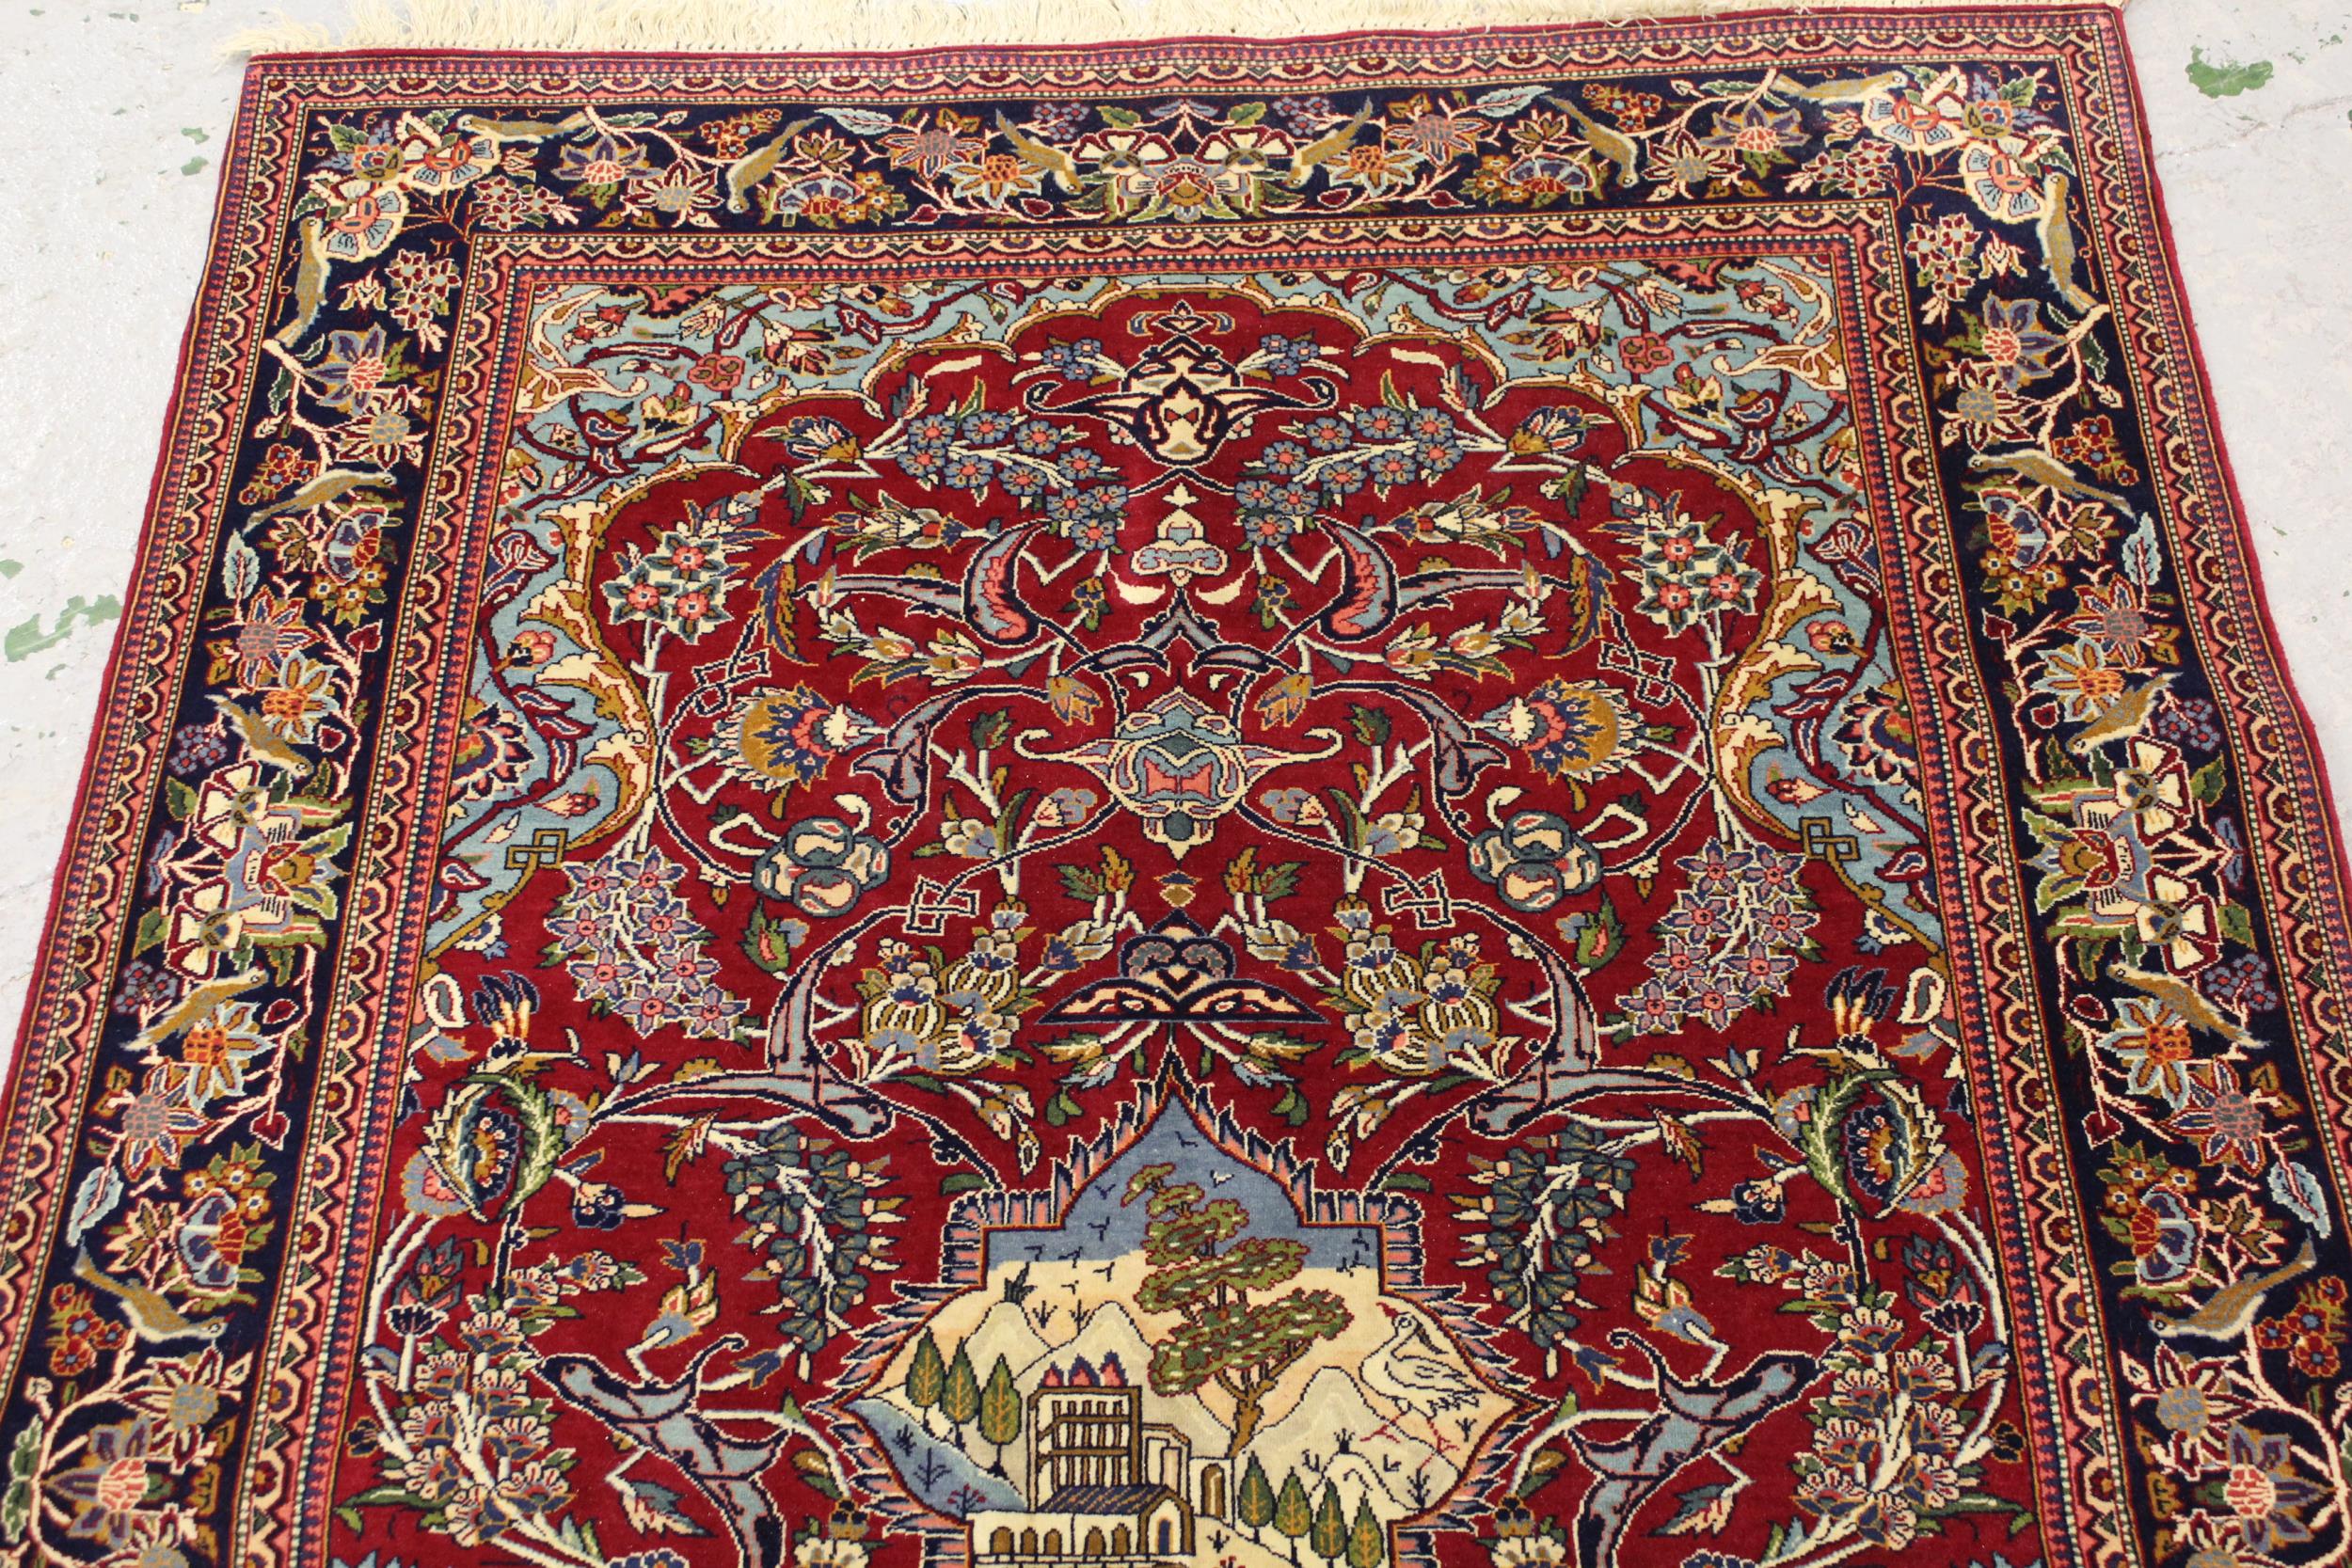 Qum rug with a pictorial centre medallion and all over stylised floral design on wine red ground - Image 2 of 4